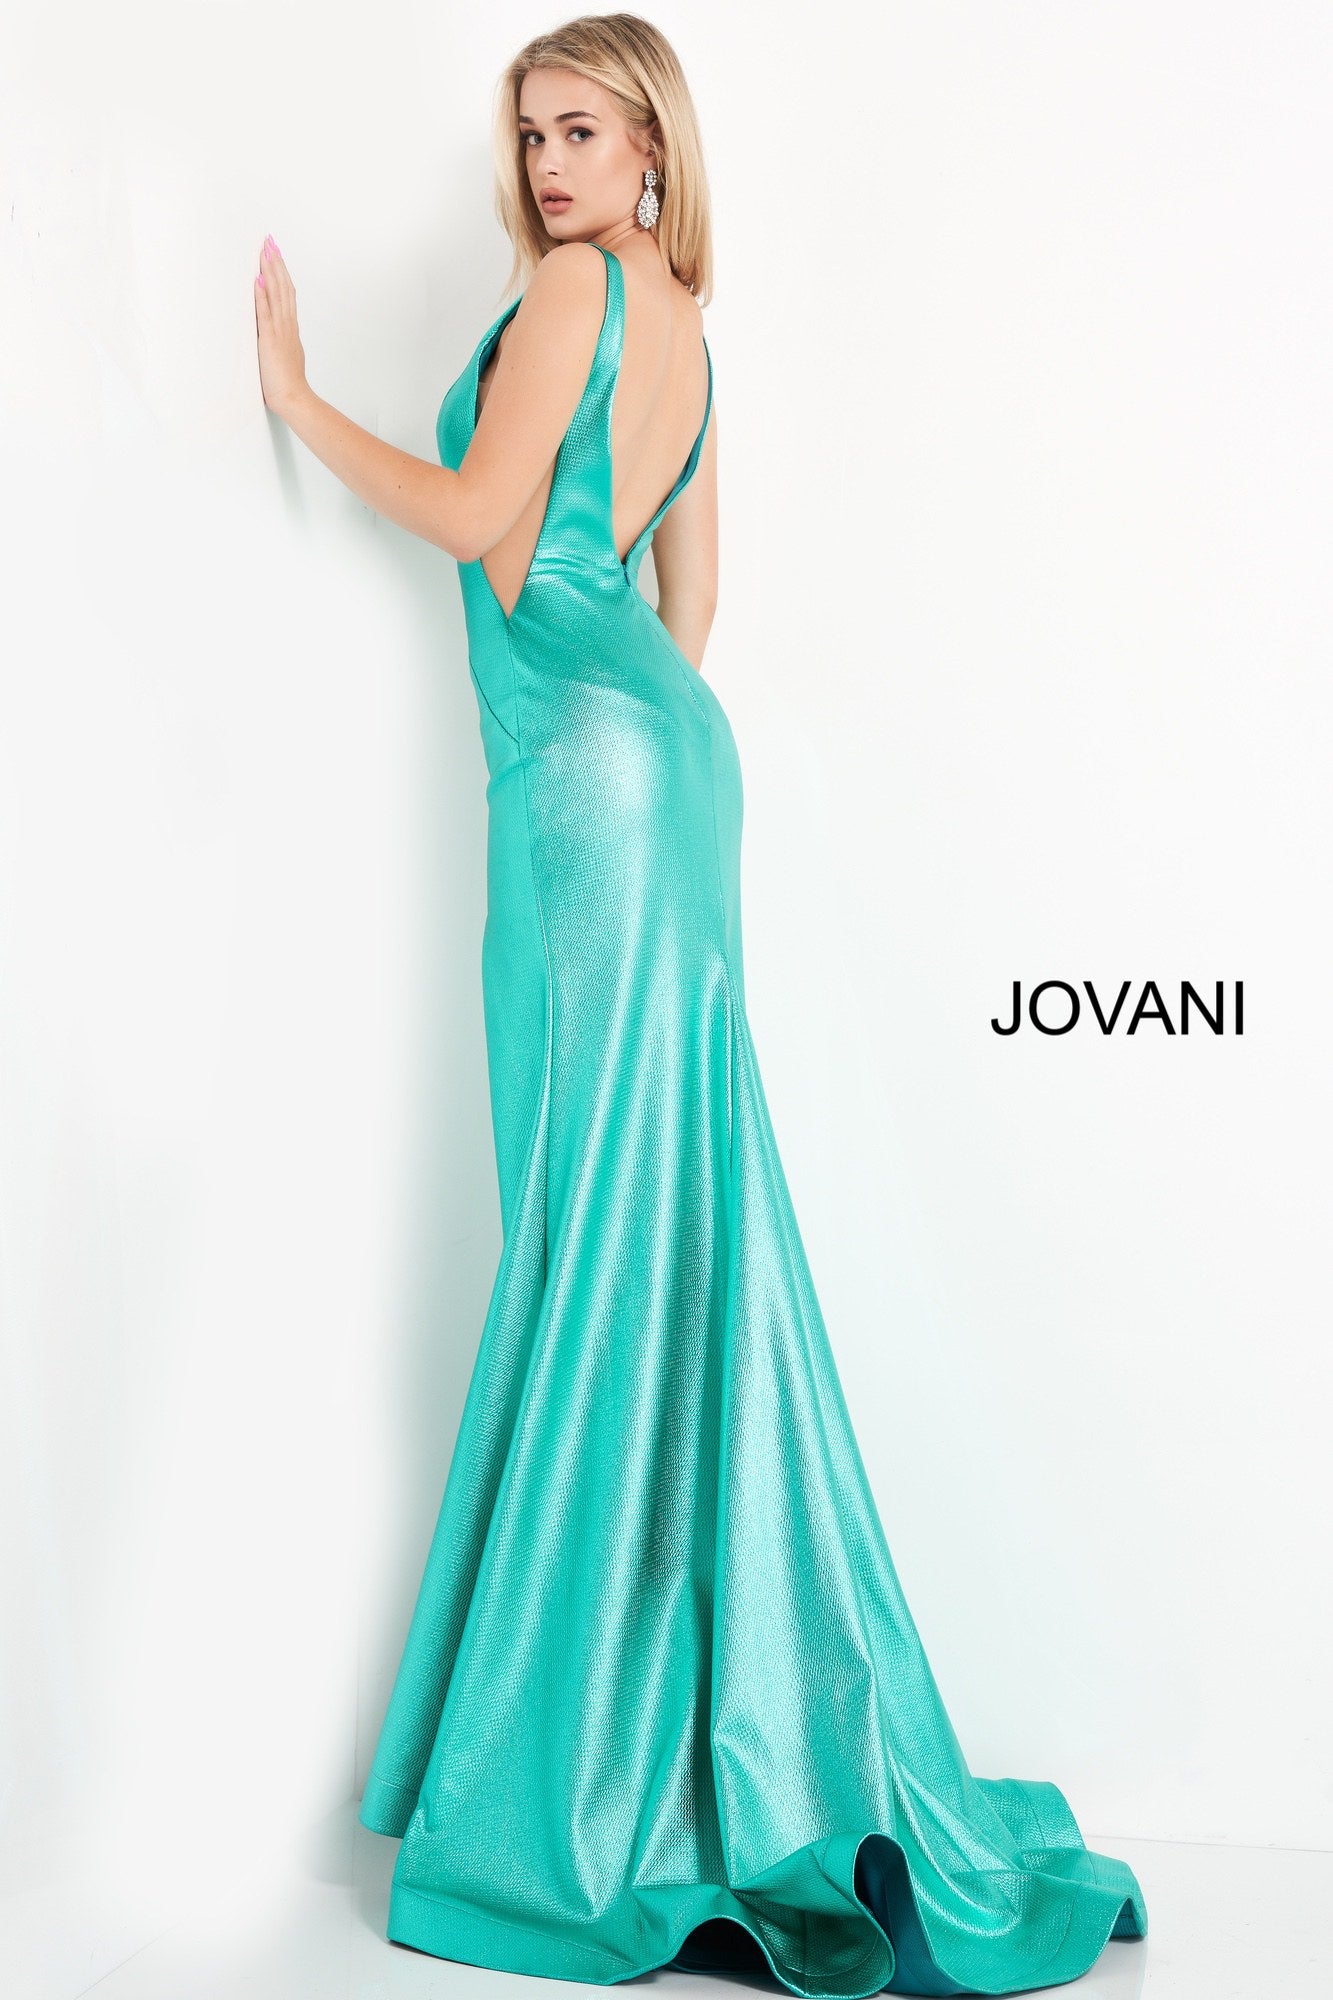 Jovani 06125 is a gorgeous Long Fitted metallic shimmer Formal Evening Gown. Plunging Deep V Neckline with an open V Back. Fit & Flare silhouette with s slit in the thigh and a lush trumpet skirt with Gorgeous sweeping train. Sheer side panels with mesh insert.